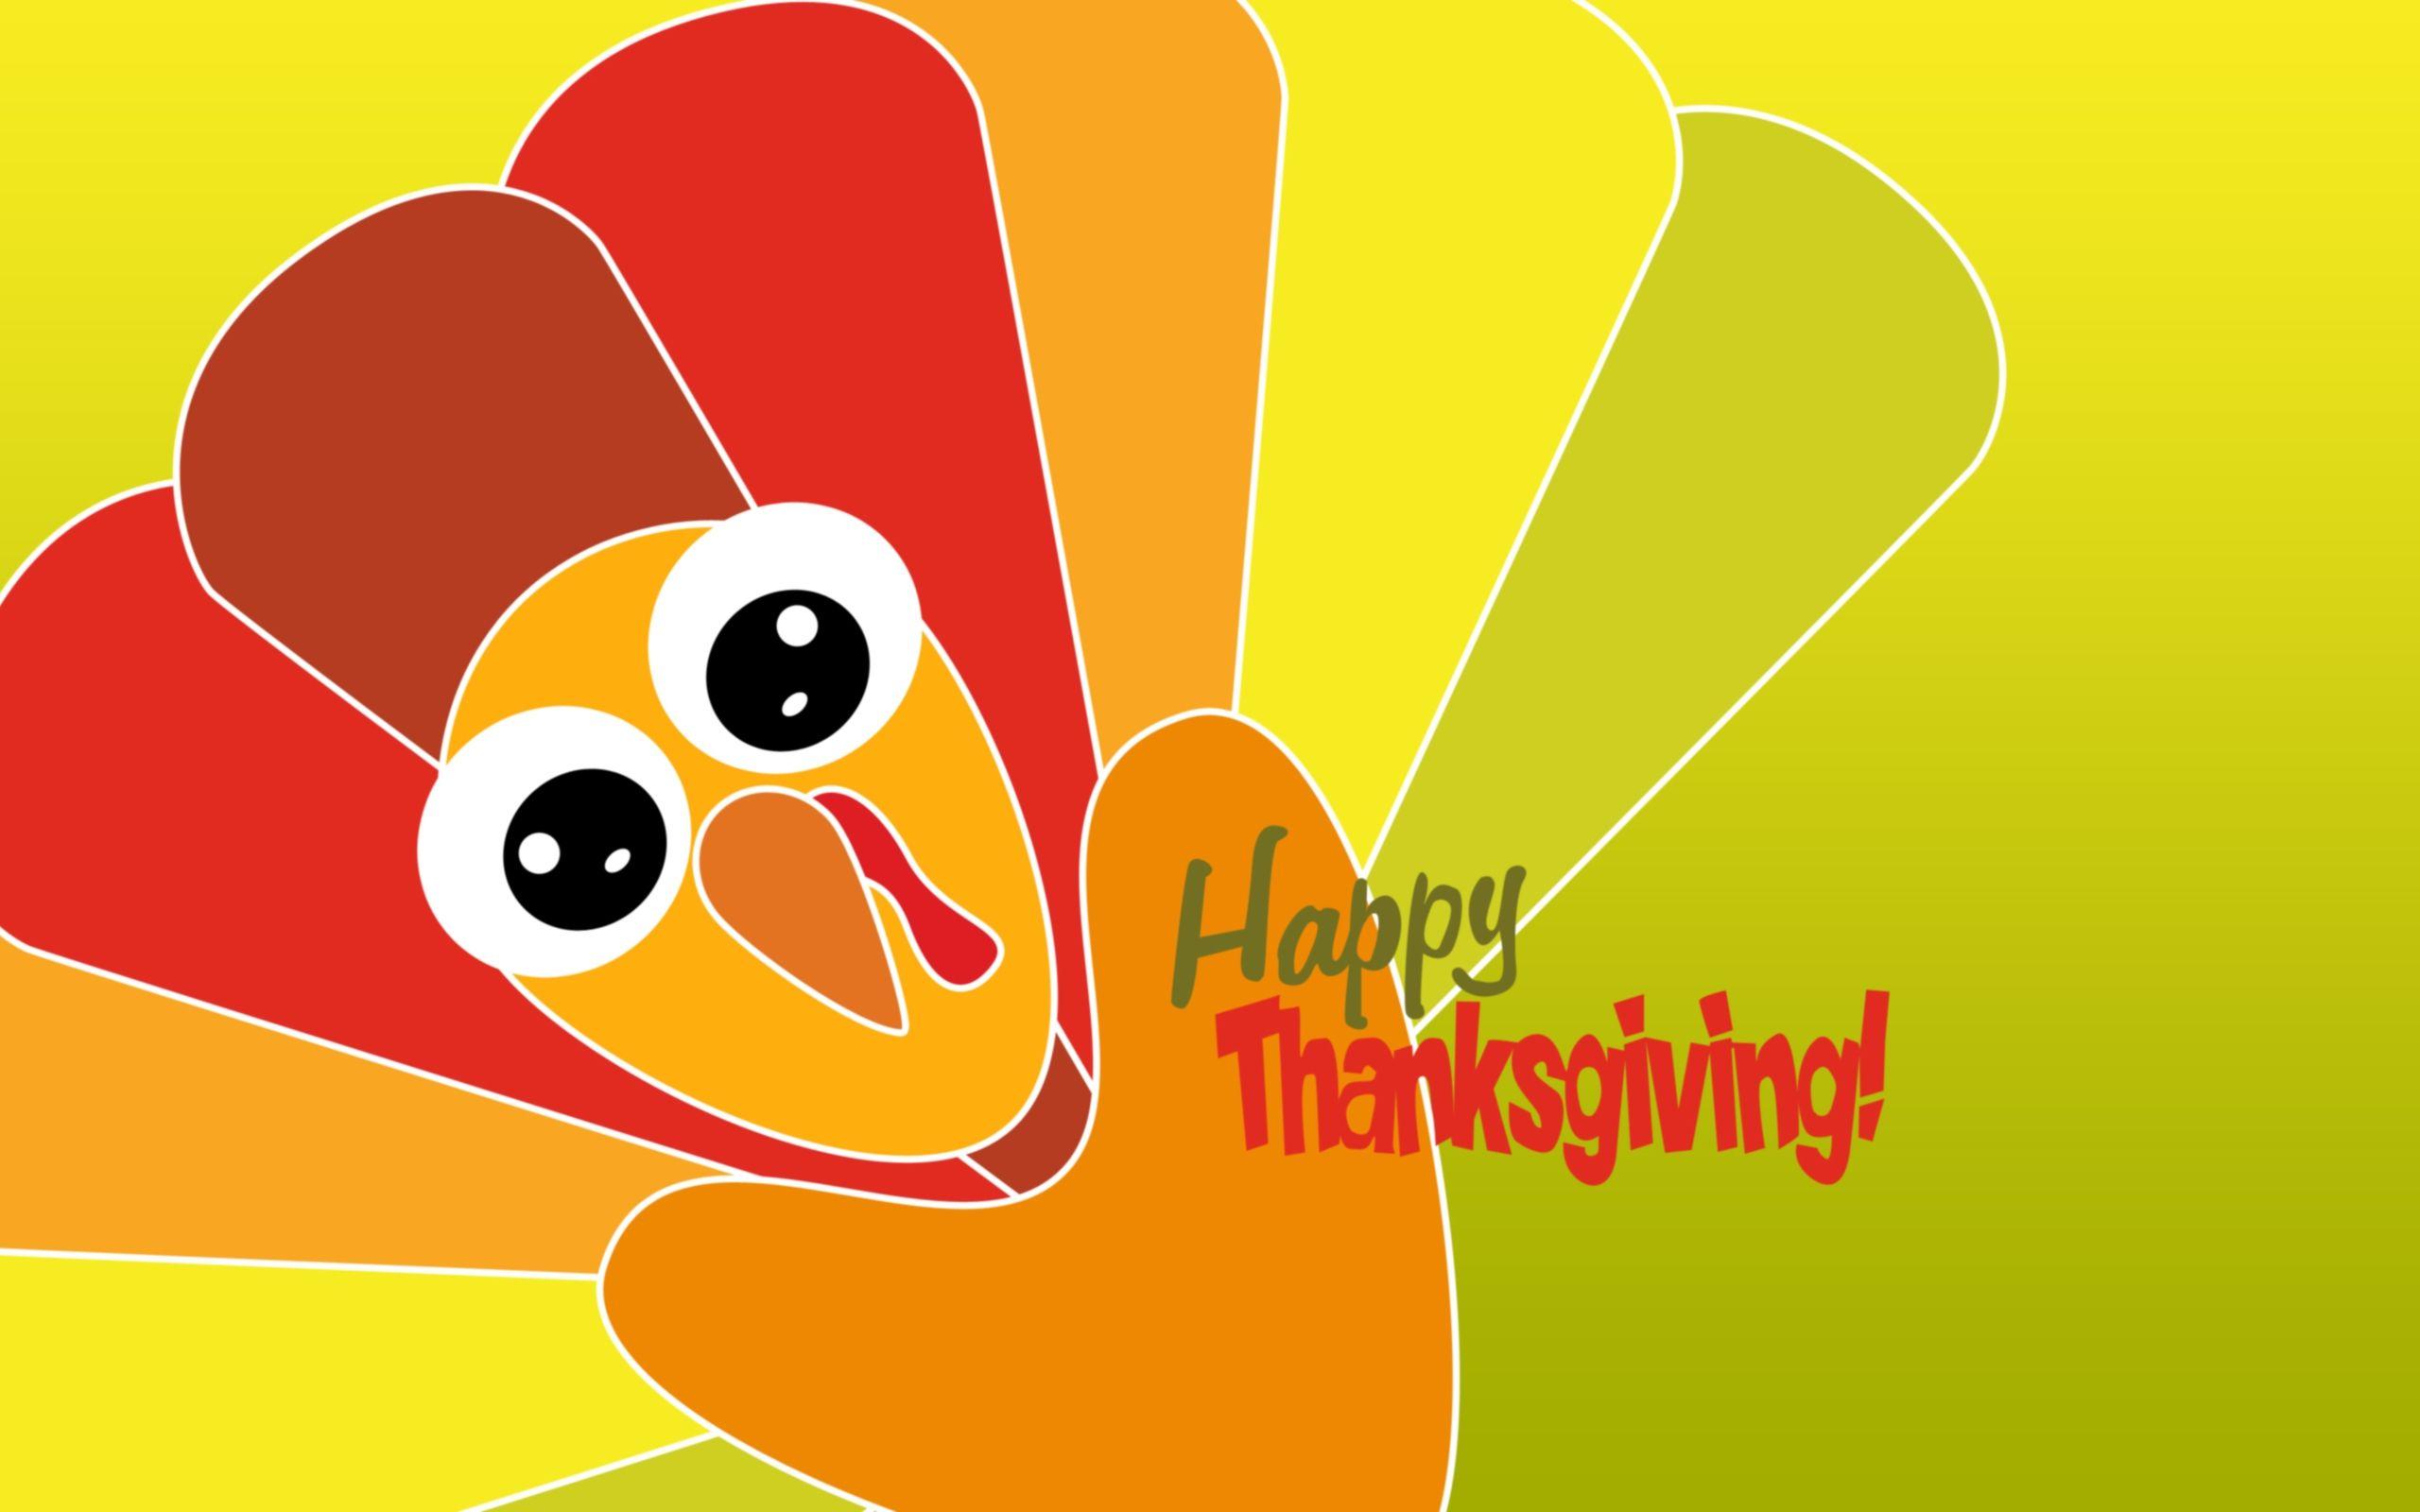 Download Free Cute Thanksgiving Backgrounds